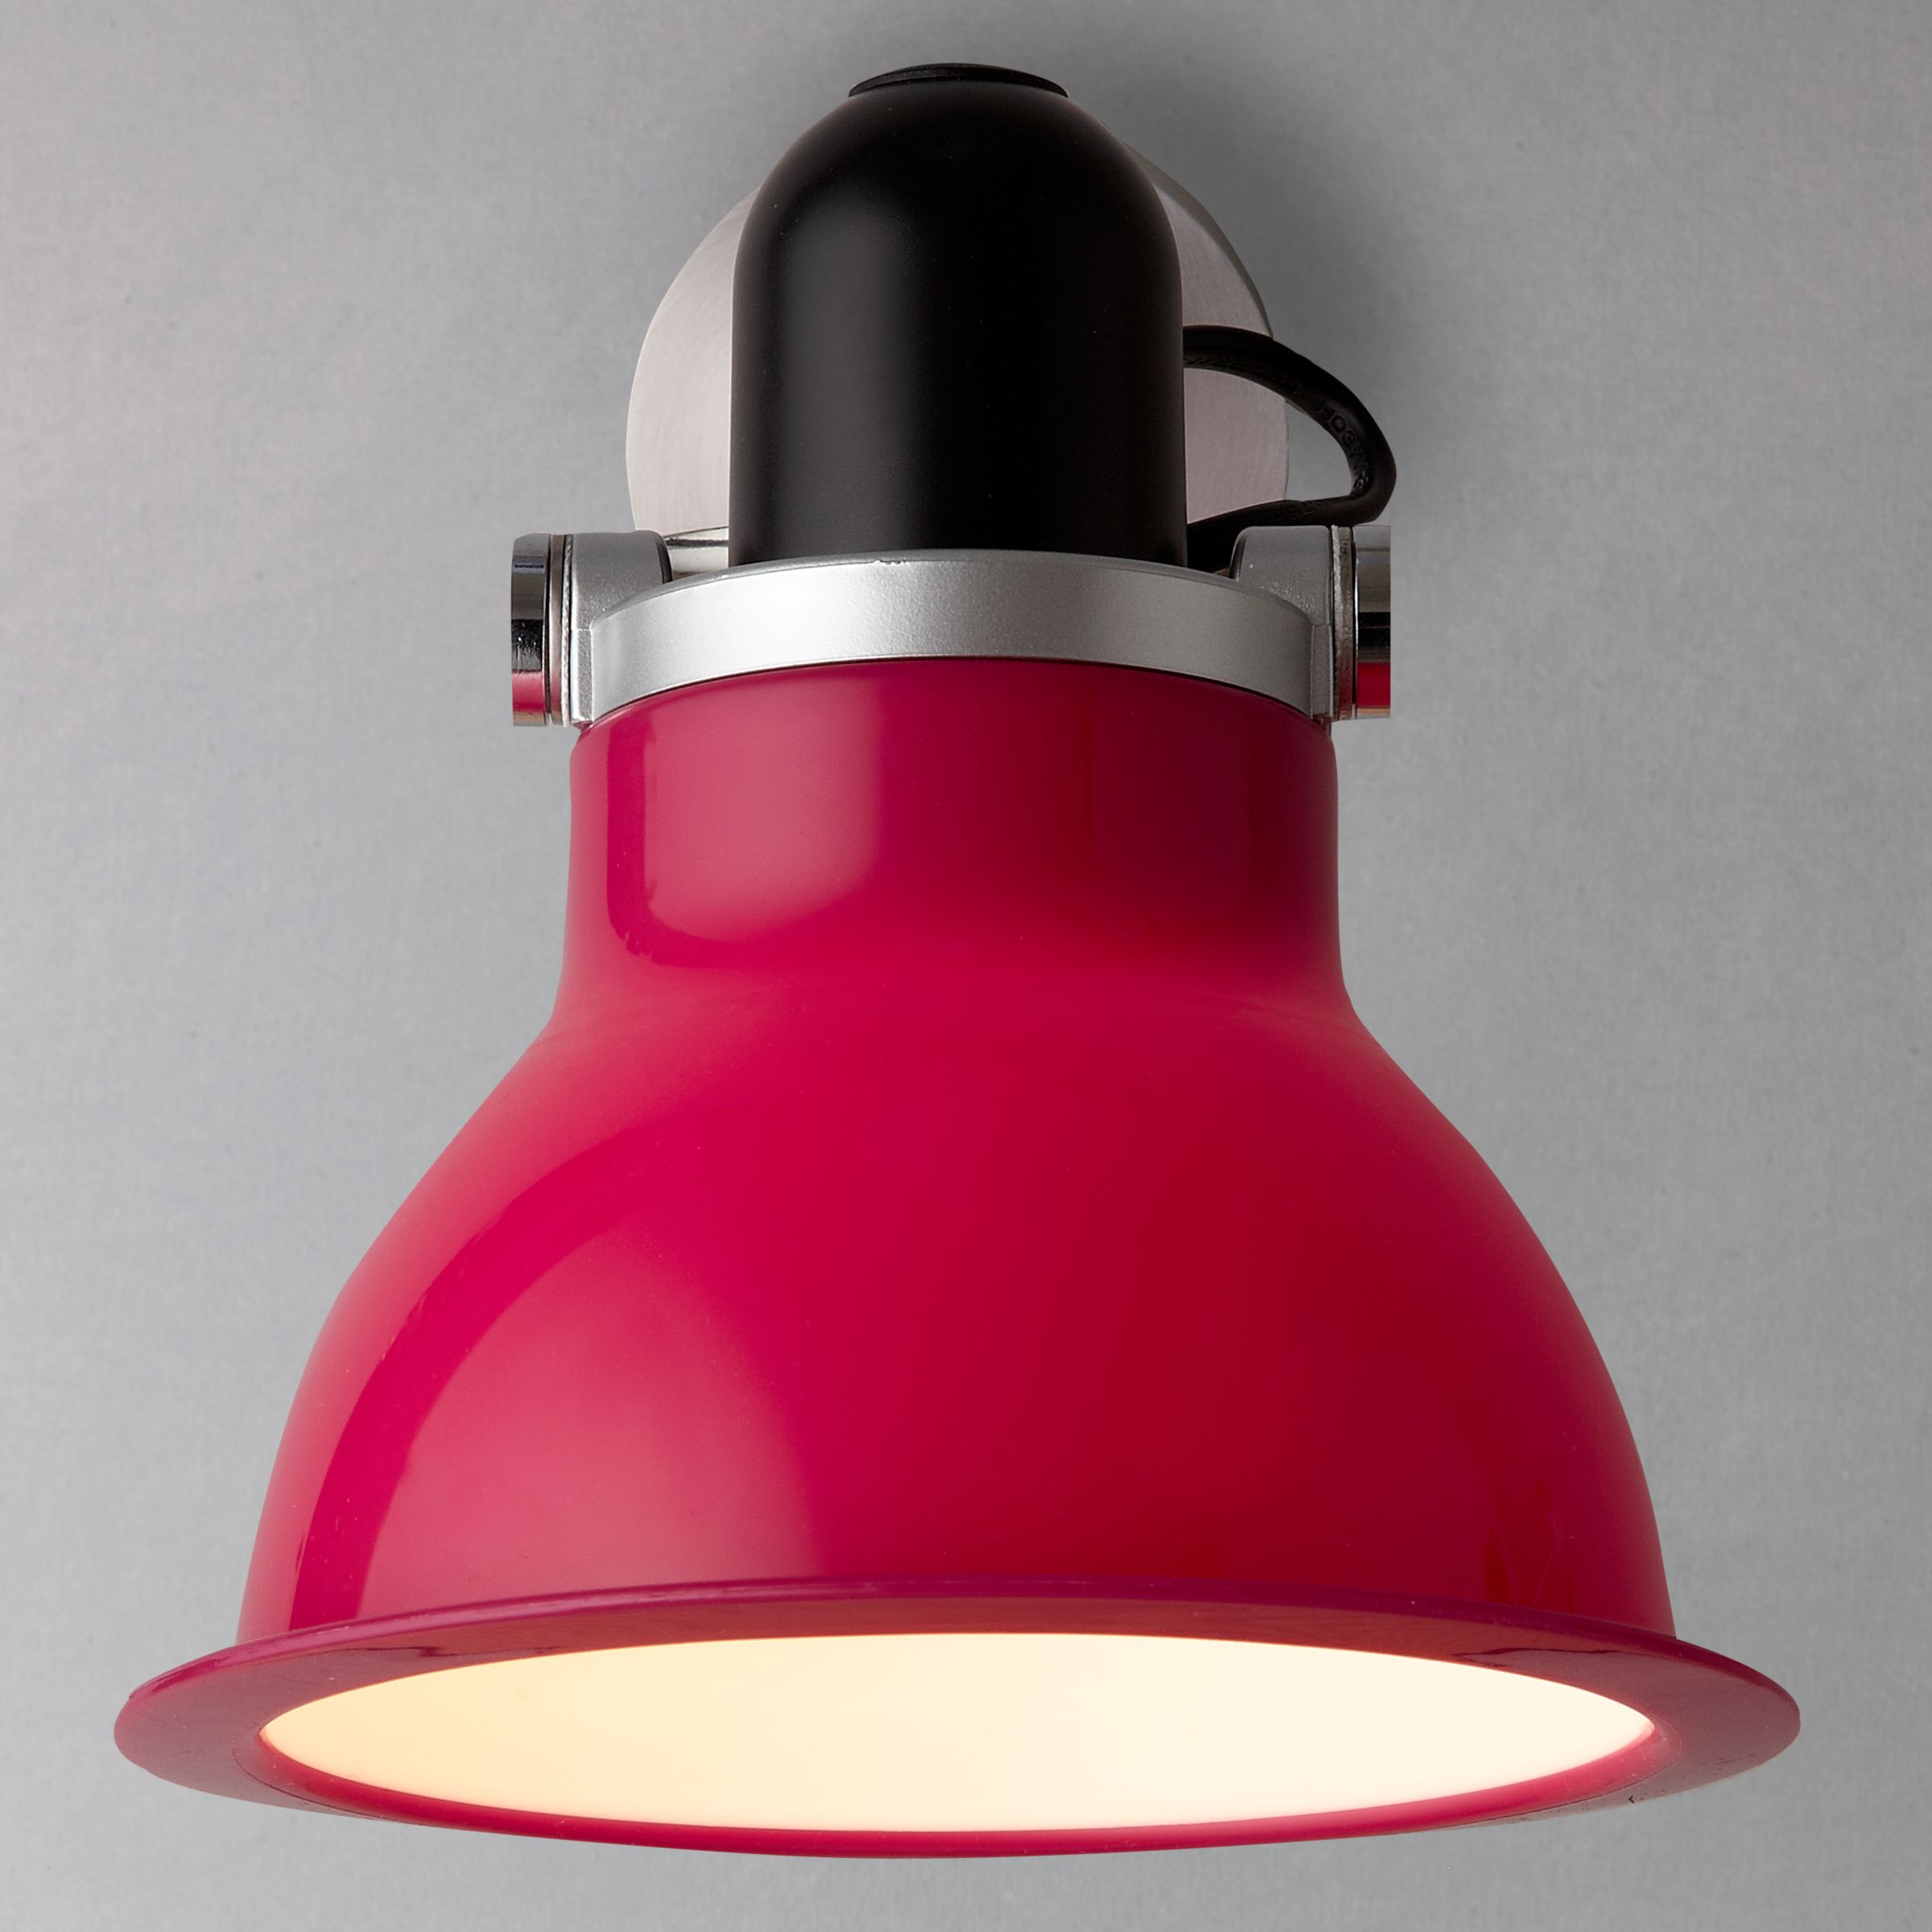 Anglepoise Type 1228 Wall Light, Carmine Red